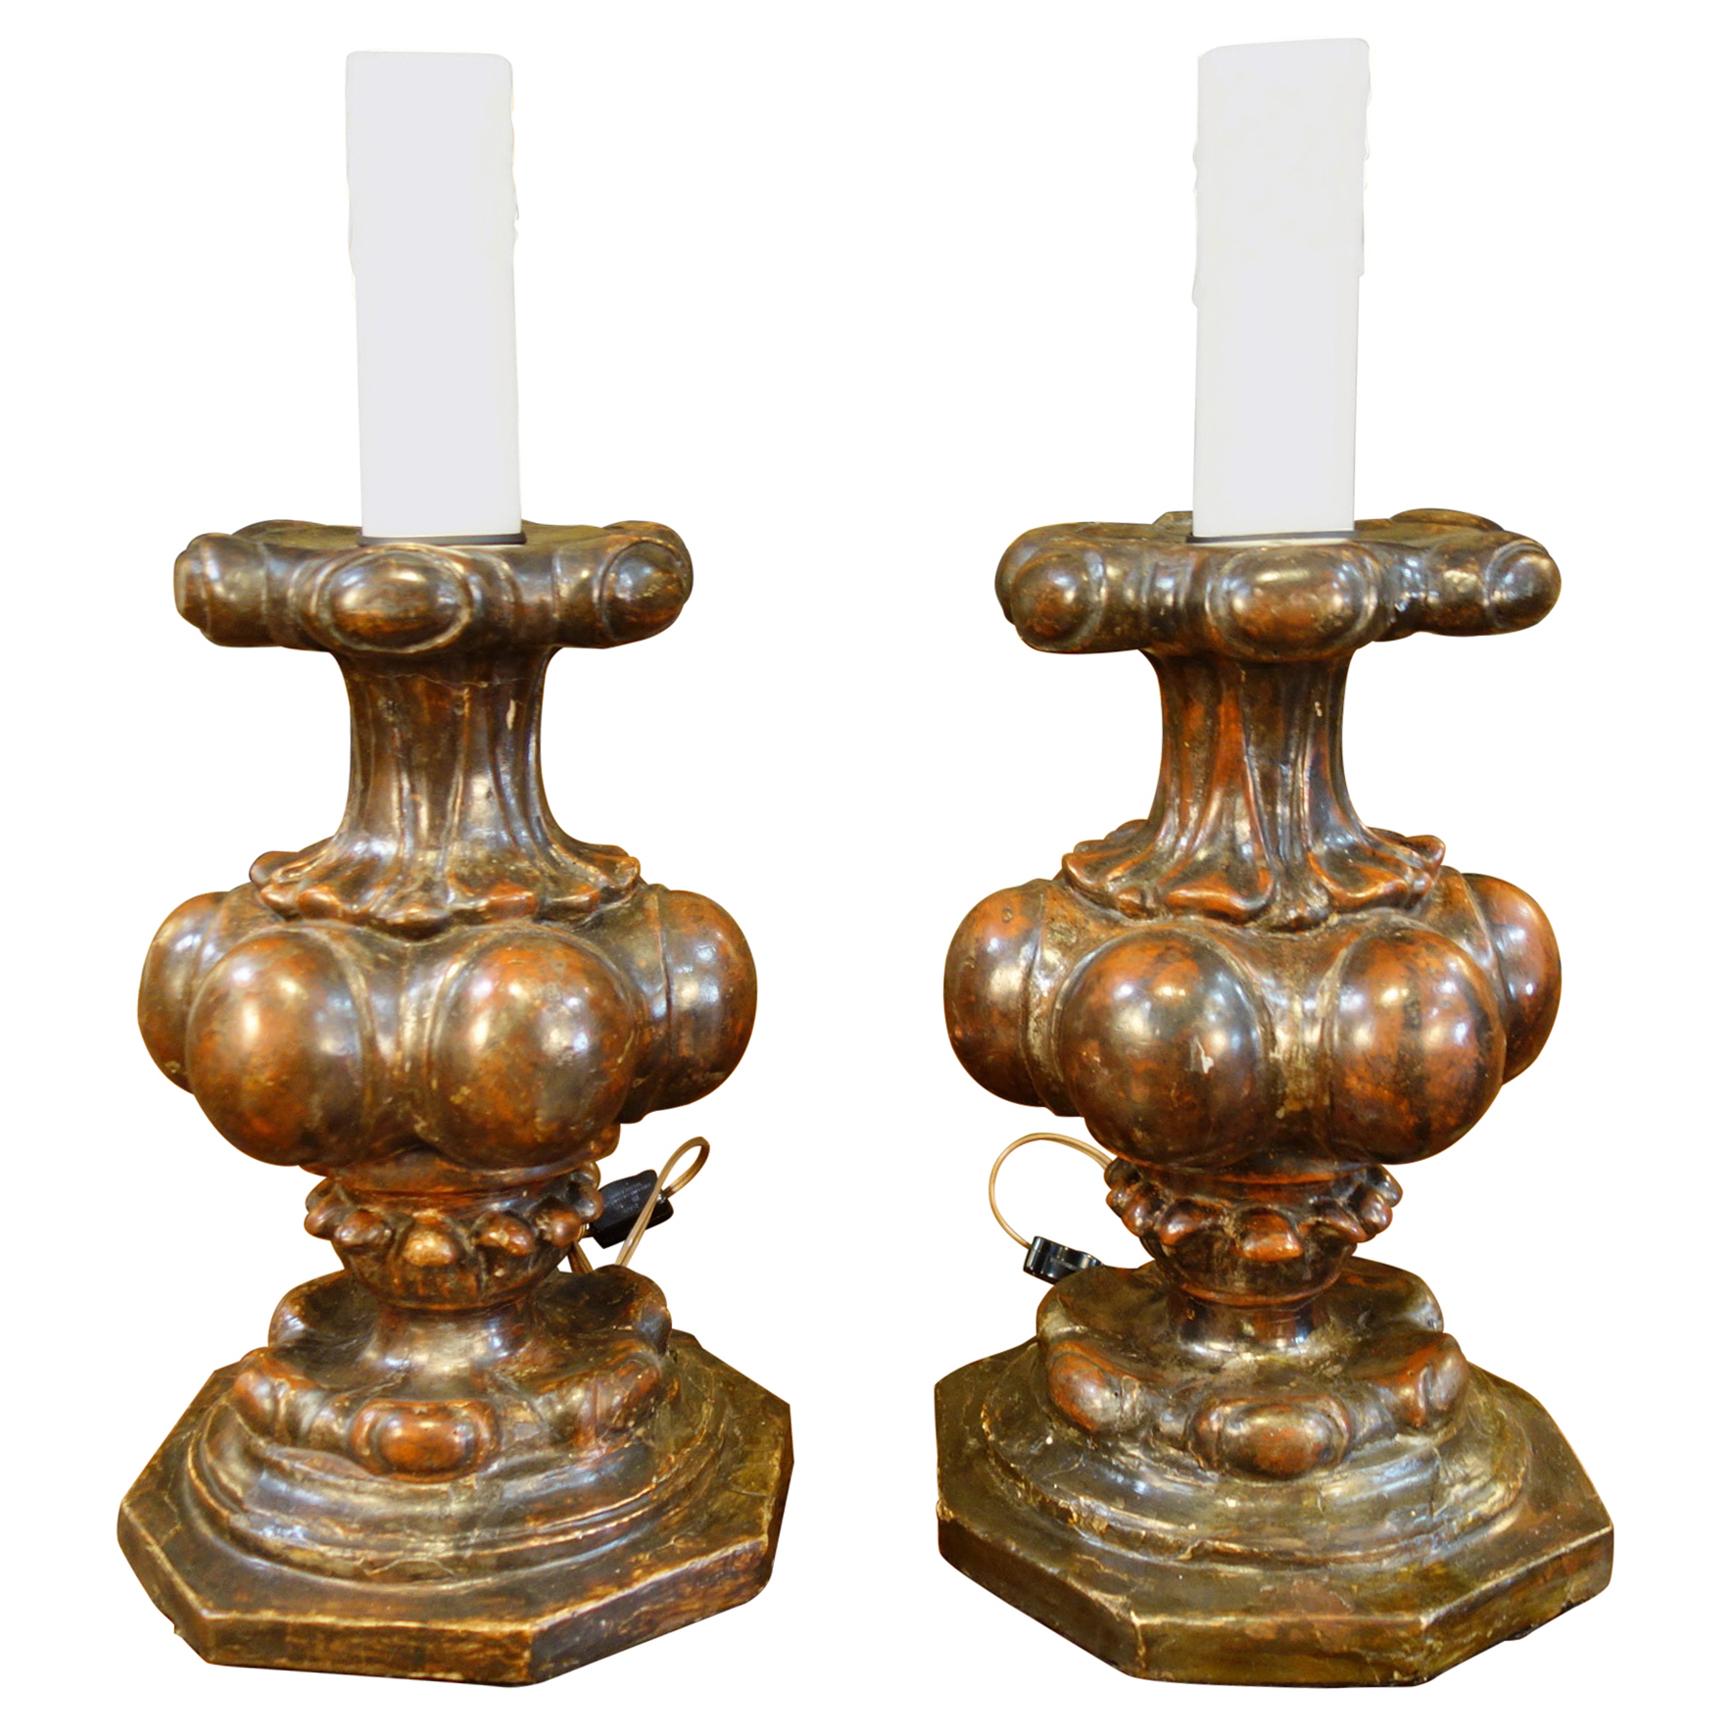 Late 17th Century Baroque Candelabra Table Lamp Pair, Florence, circa 1690